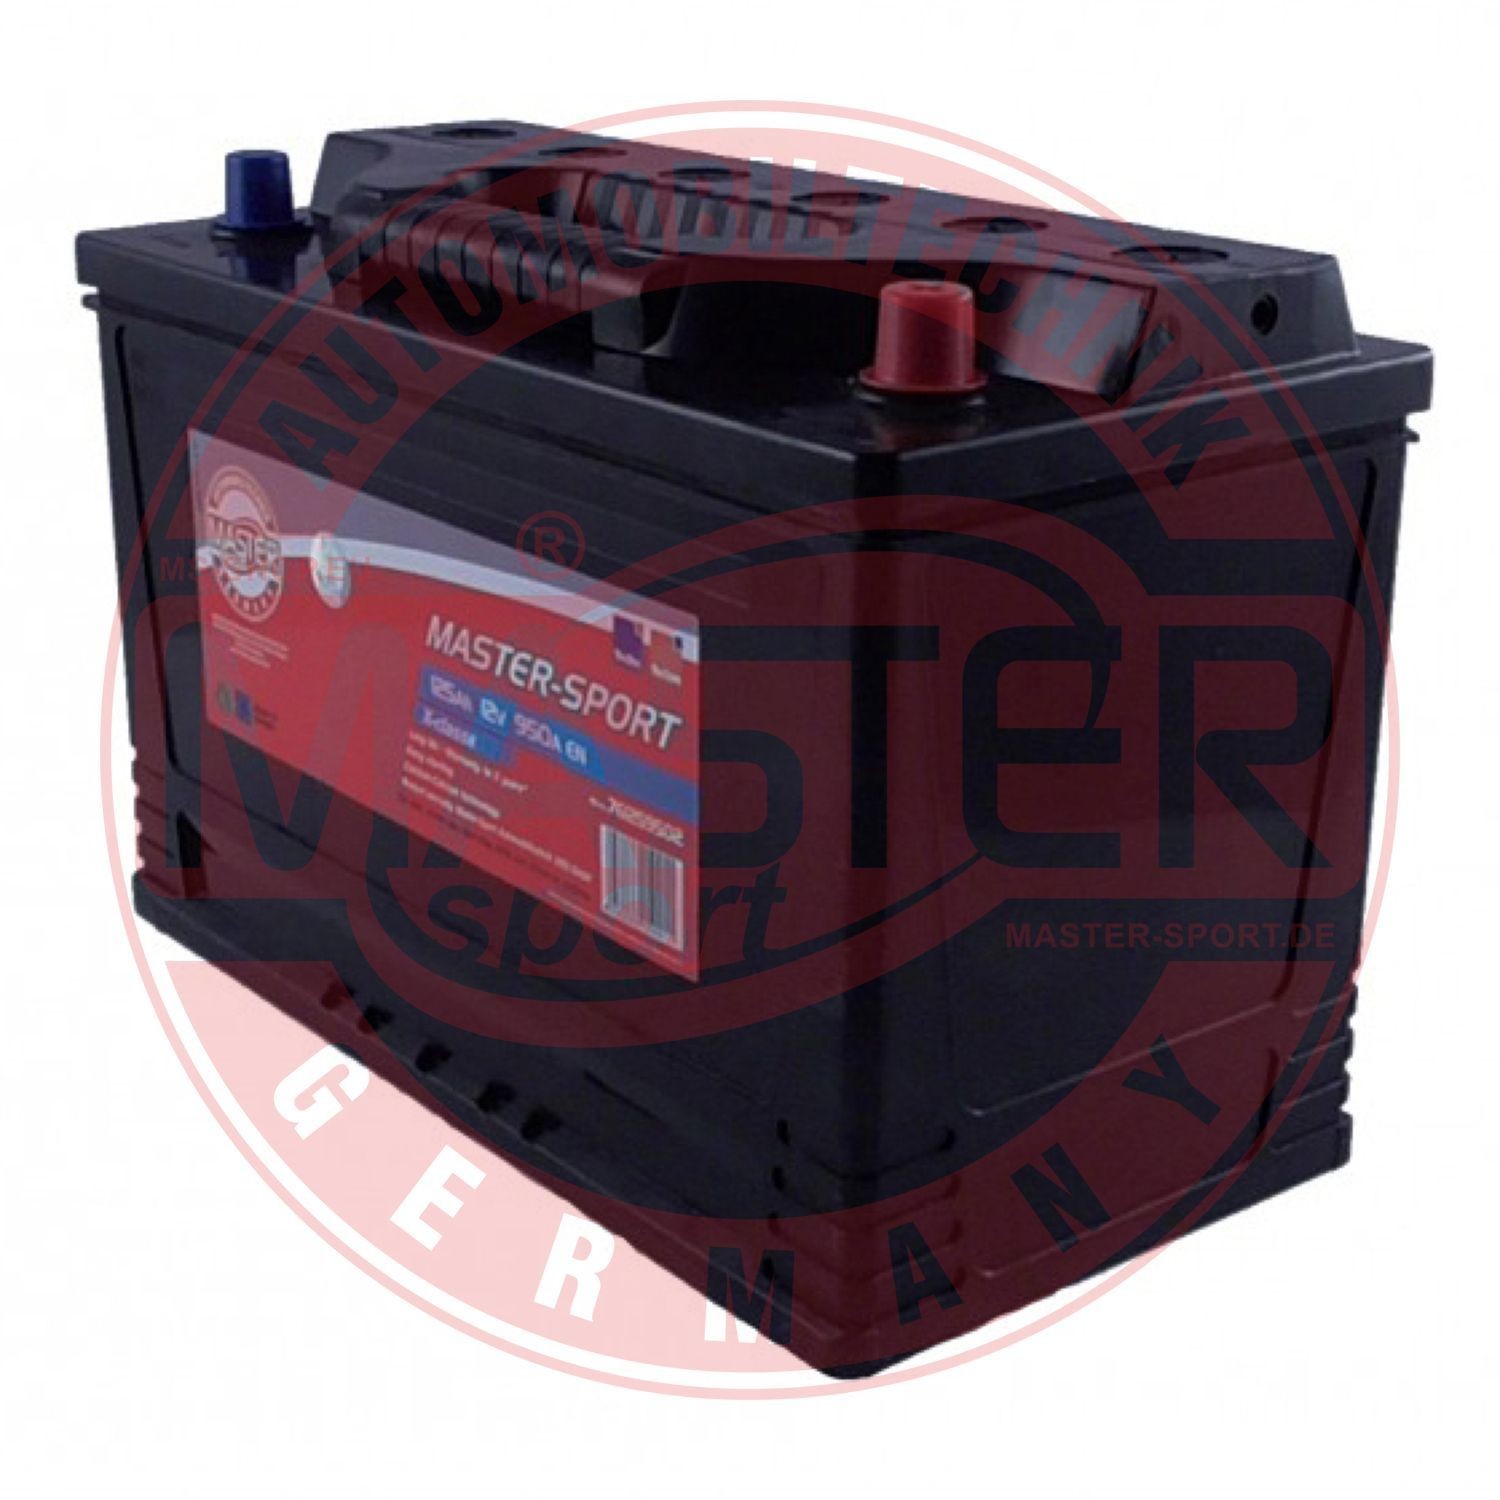 MASTER-SPORT 761259502 Battery SMART experience and price